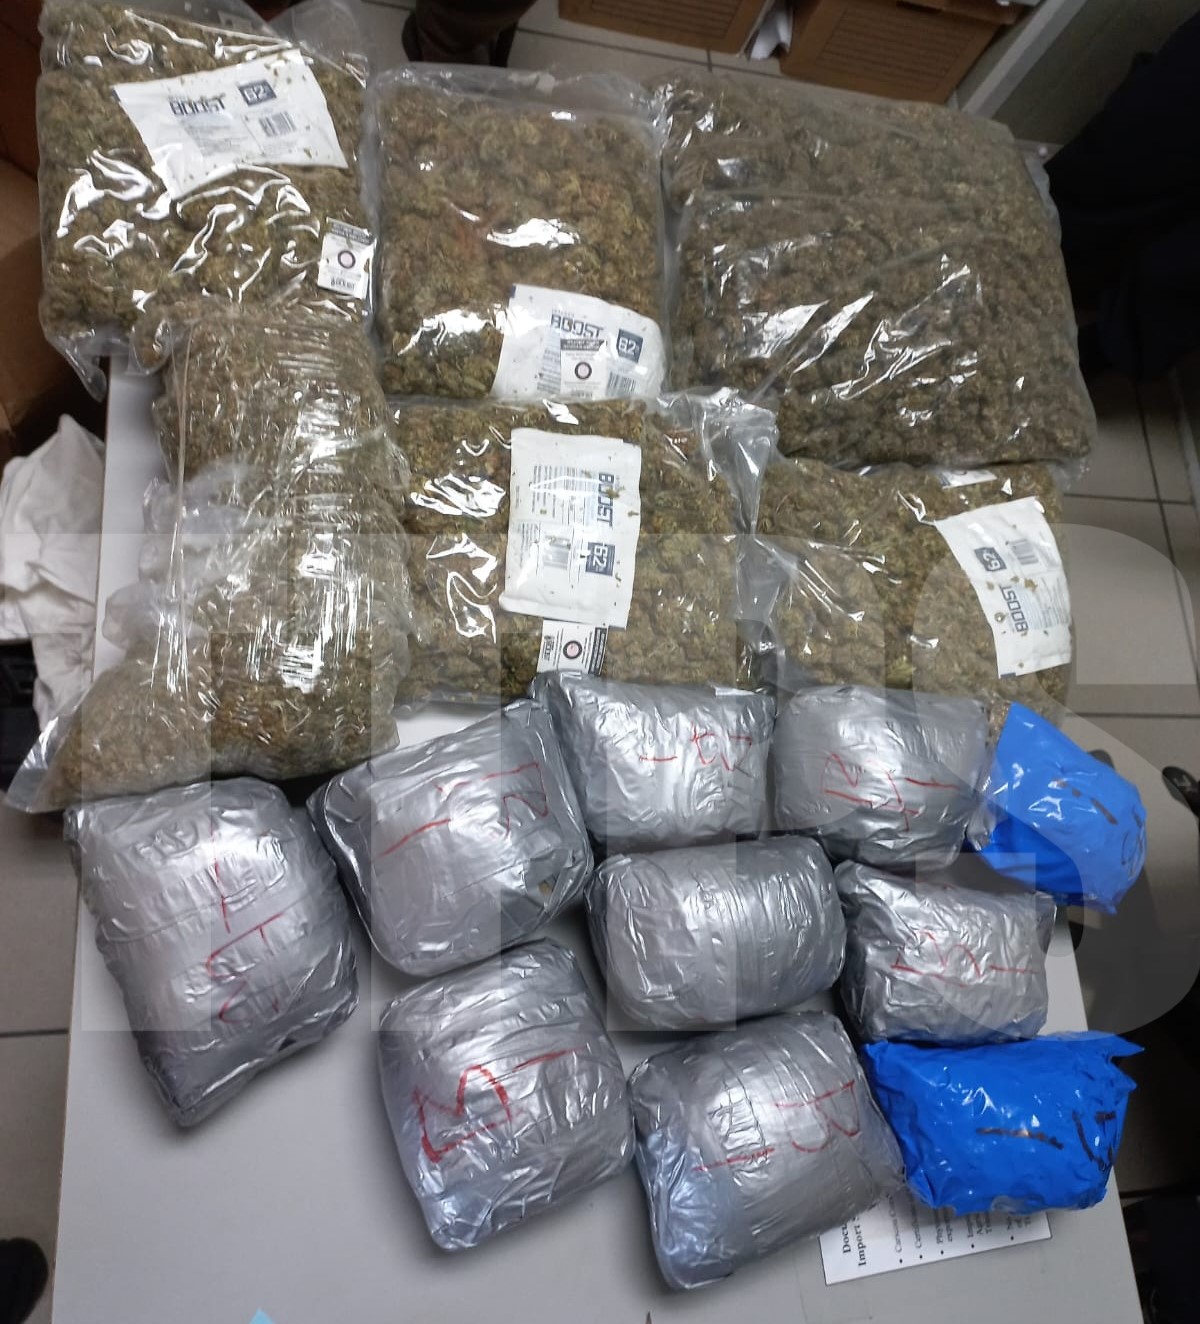 Over $4.3M worth of narcotics seized- 3 arrested